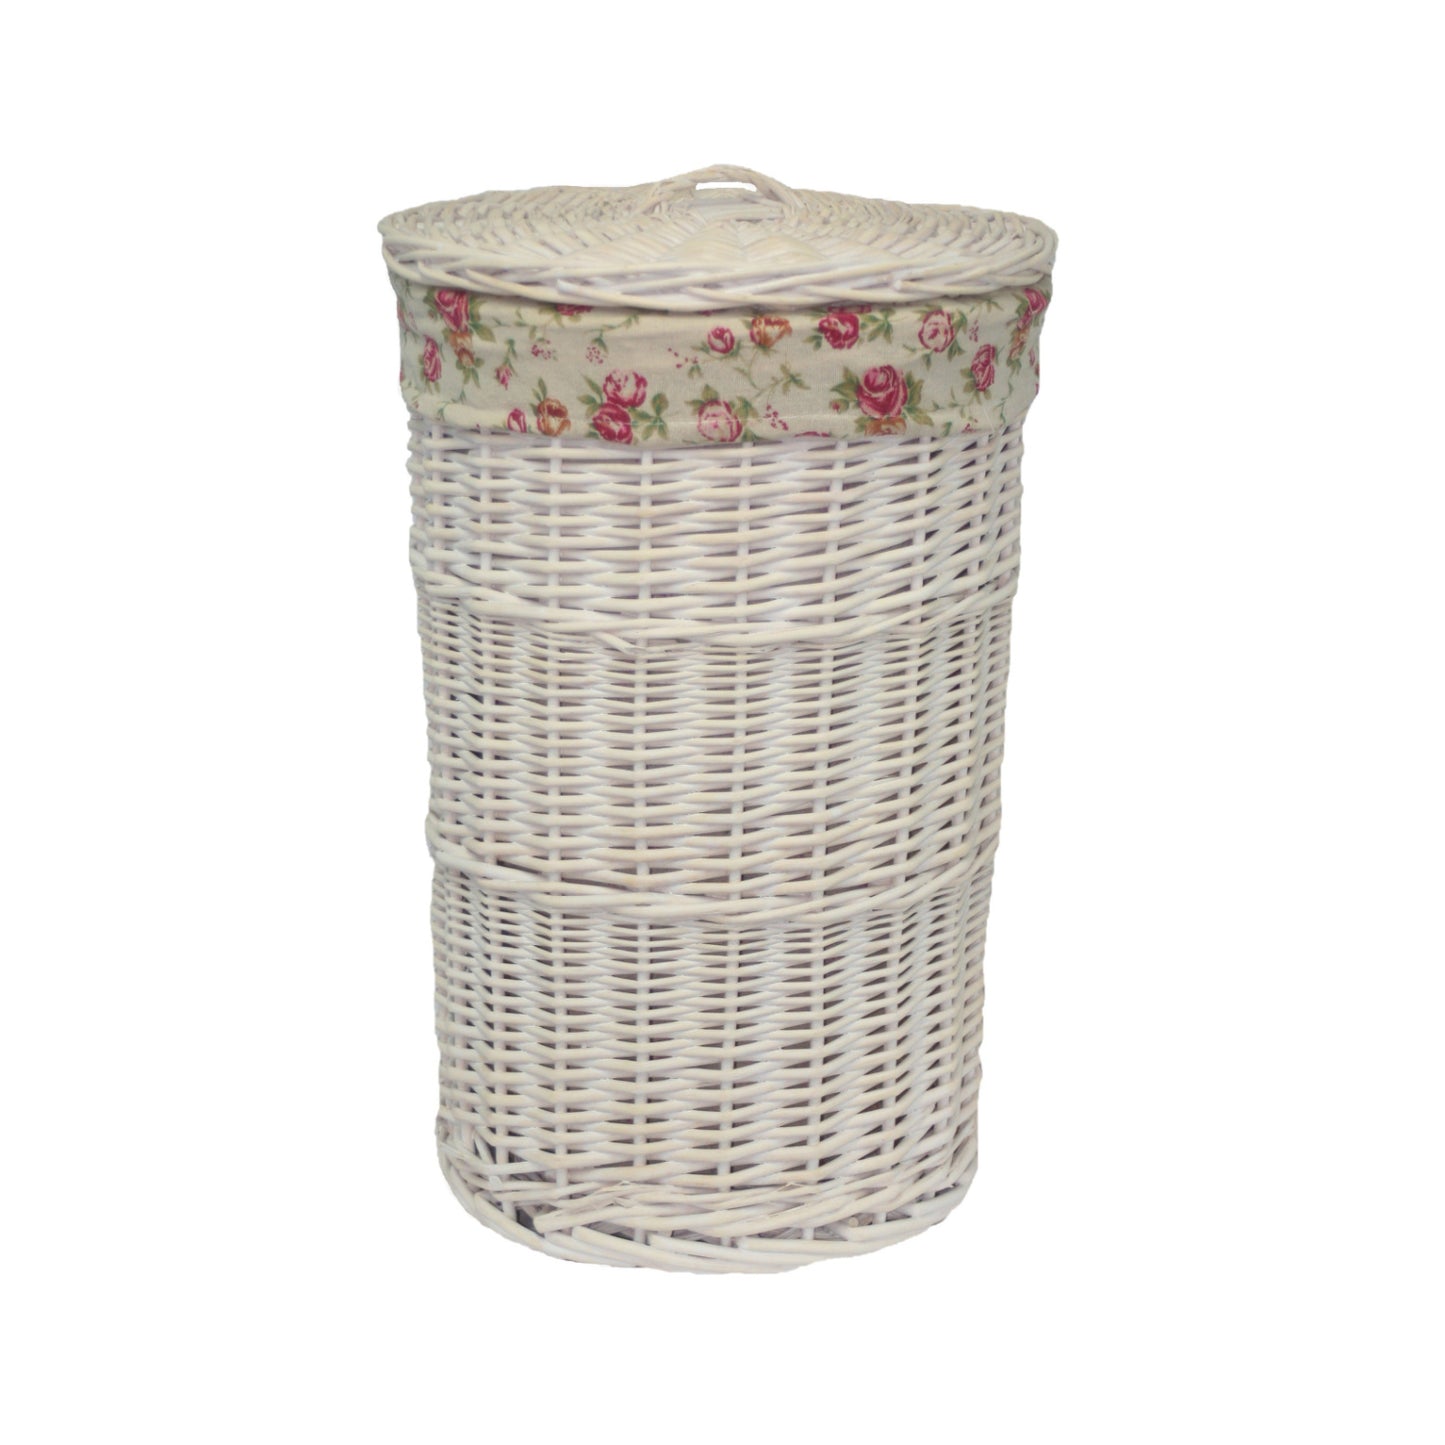 Small Round White Wash Laundry Hamper With Garden Rose Lining